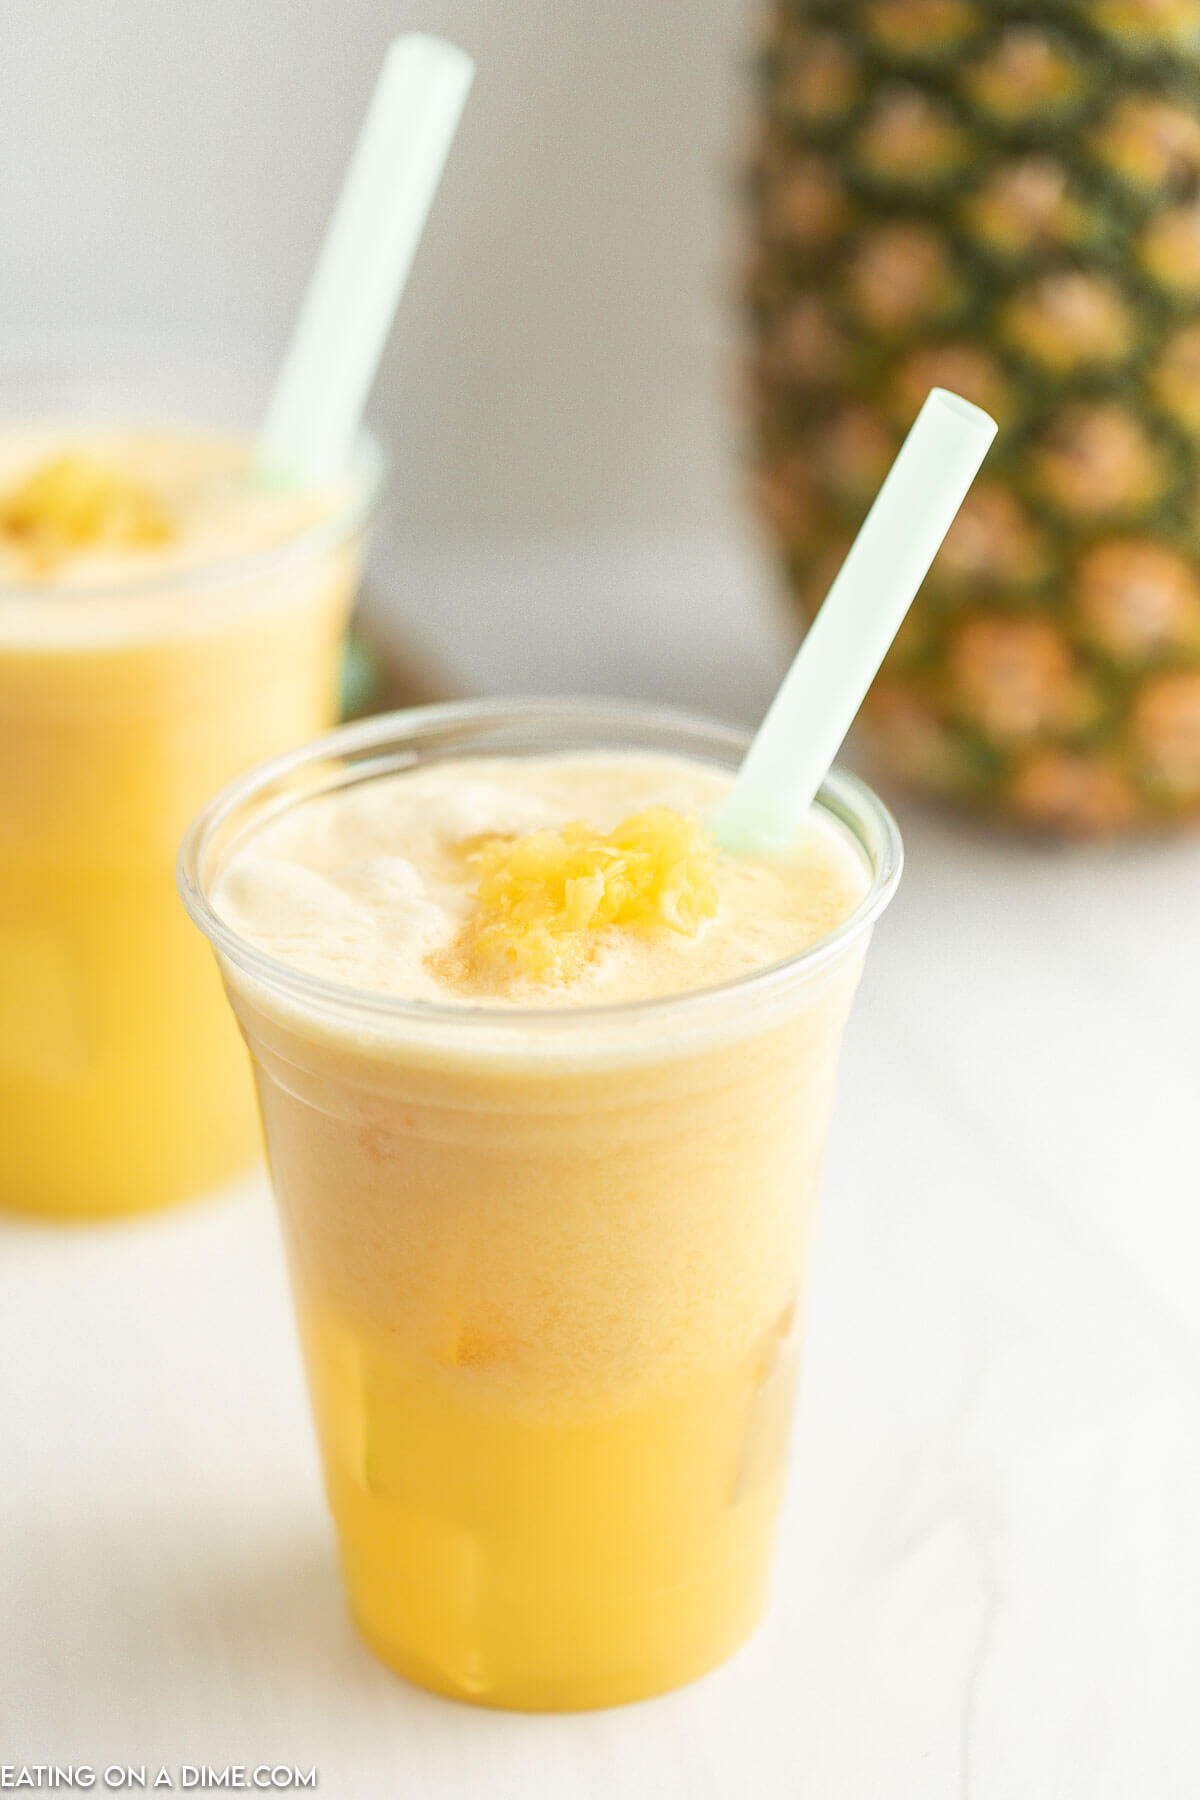 Take-away drink. Refreshing drink in a plastic cup. Pineapple